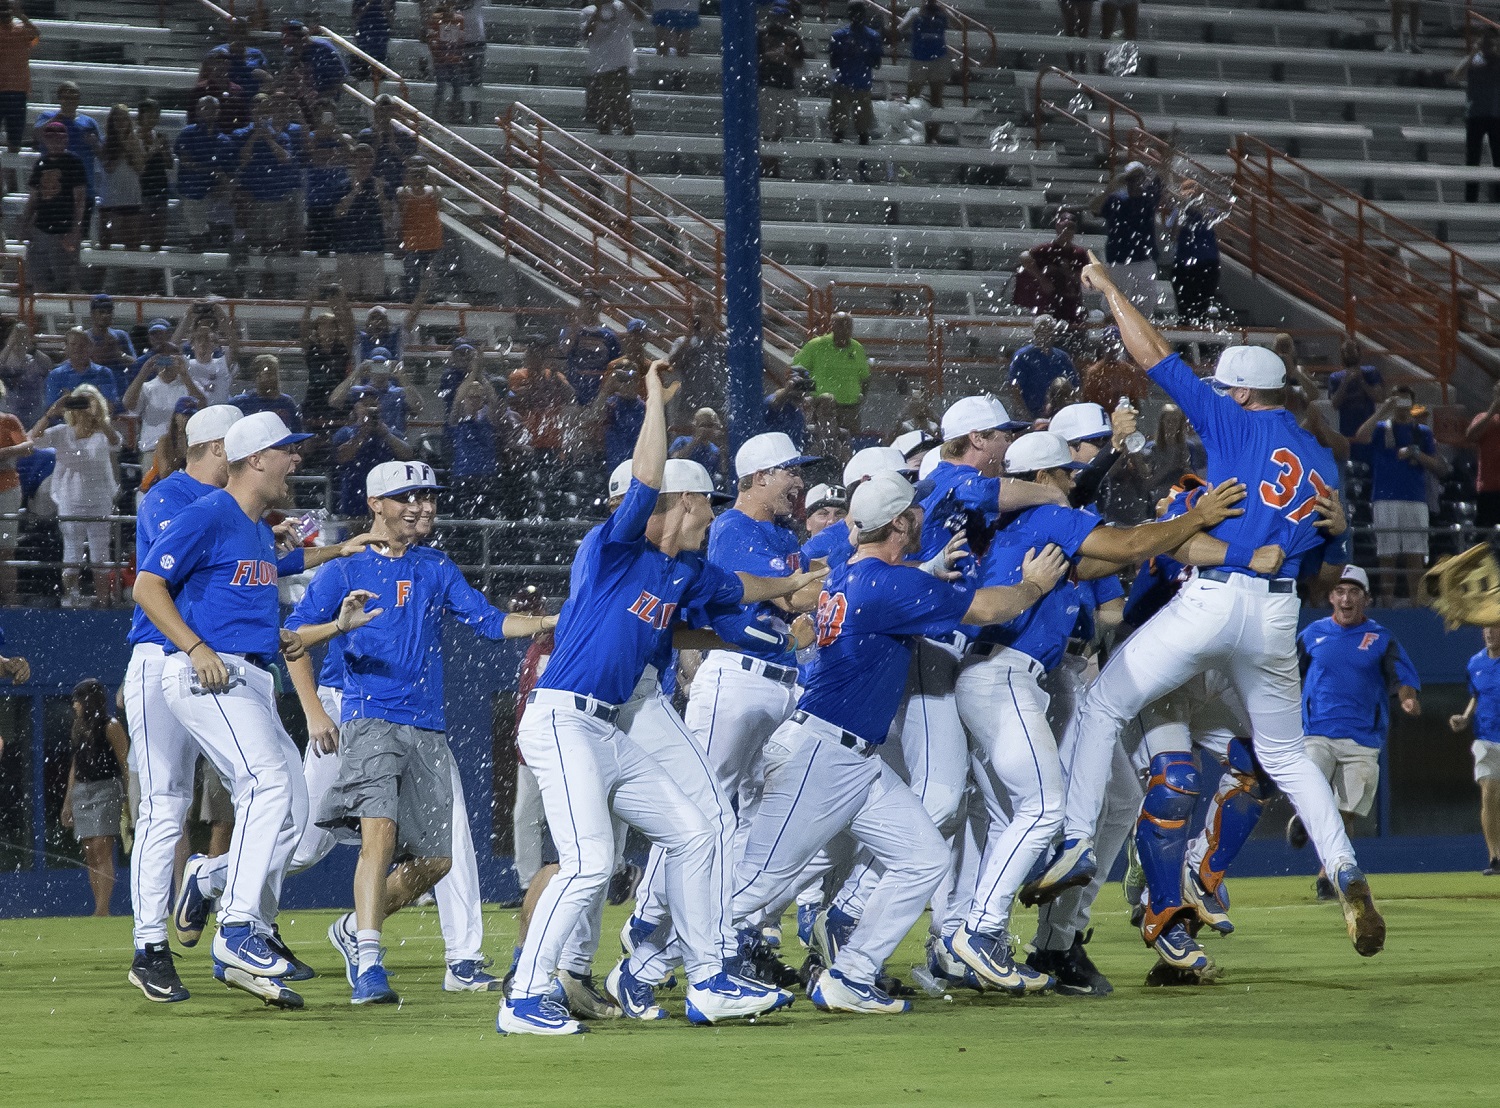 The Florida team celebrates a 7-0 win over Florida State in Game 3 of an NCAA college baseball tournament super regional in Gainesville, Fla., on Monday, June 13, 2016. (AP Photo/Ronald Irby)